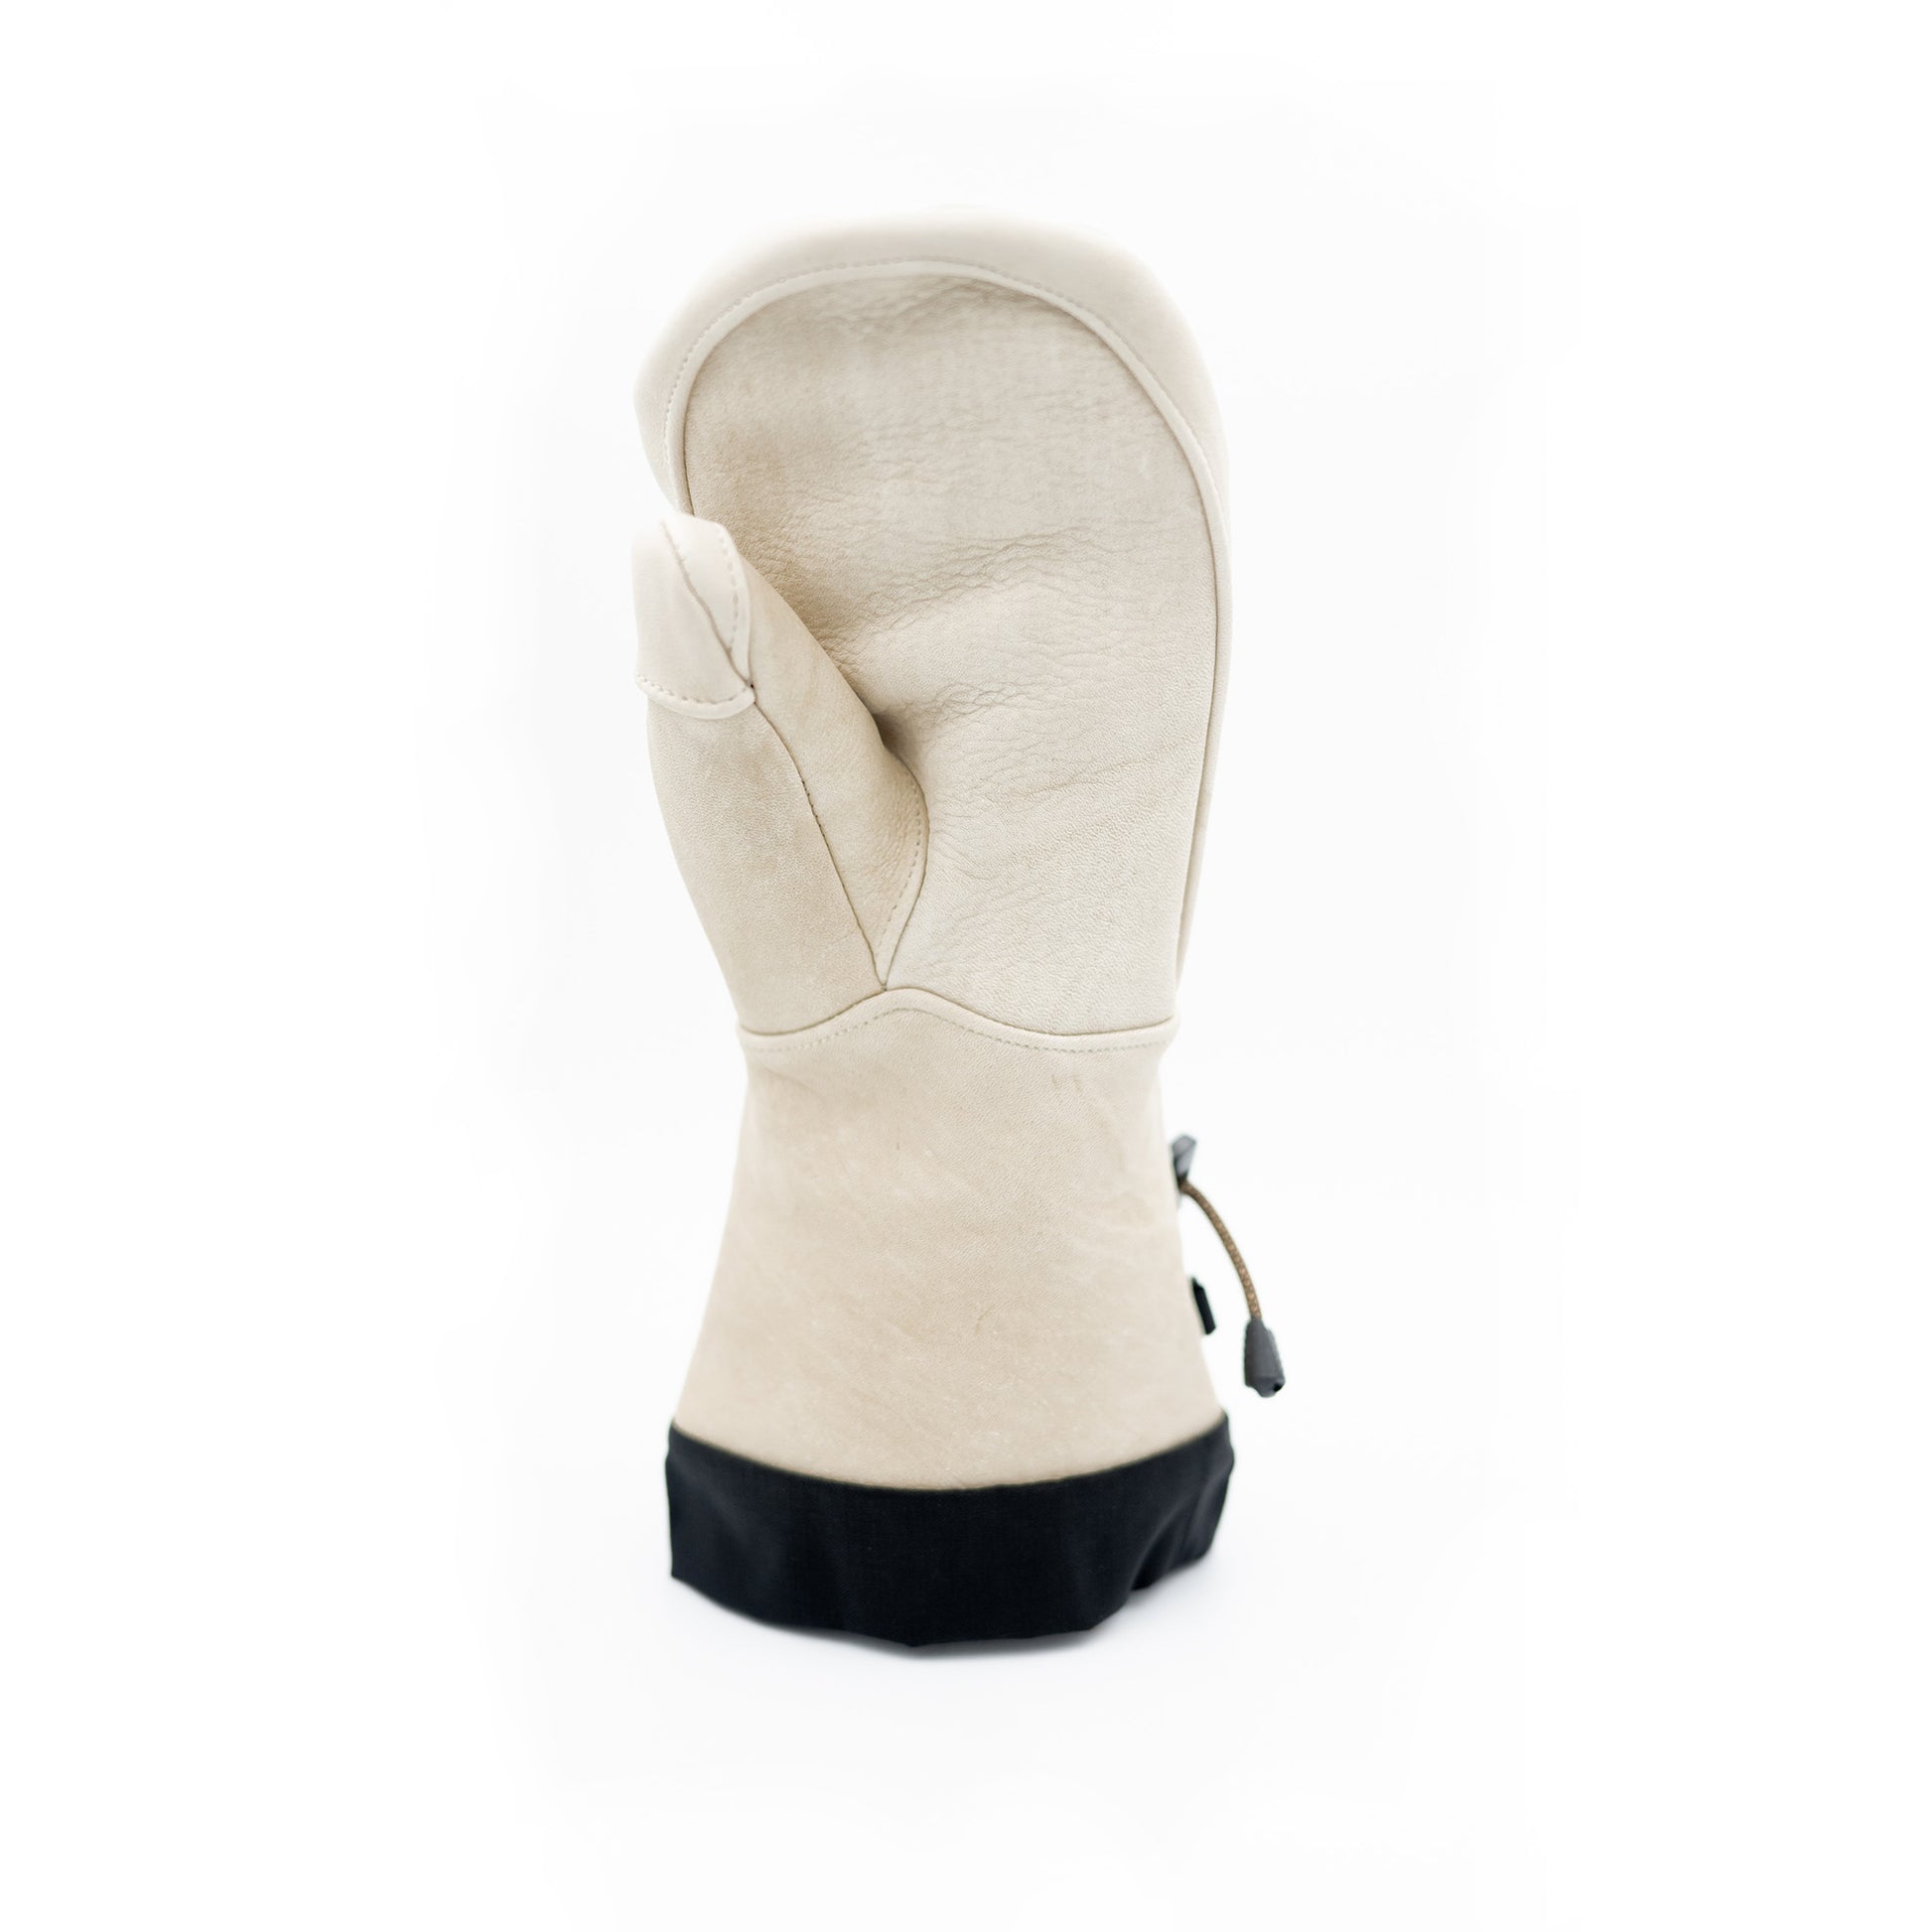 A Mainers spirit-inspired beige and black Caribou Mitts on a white background.